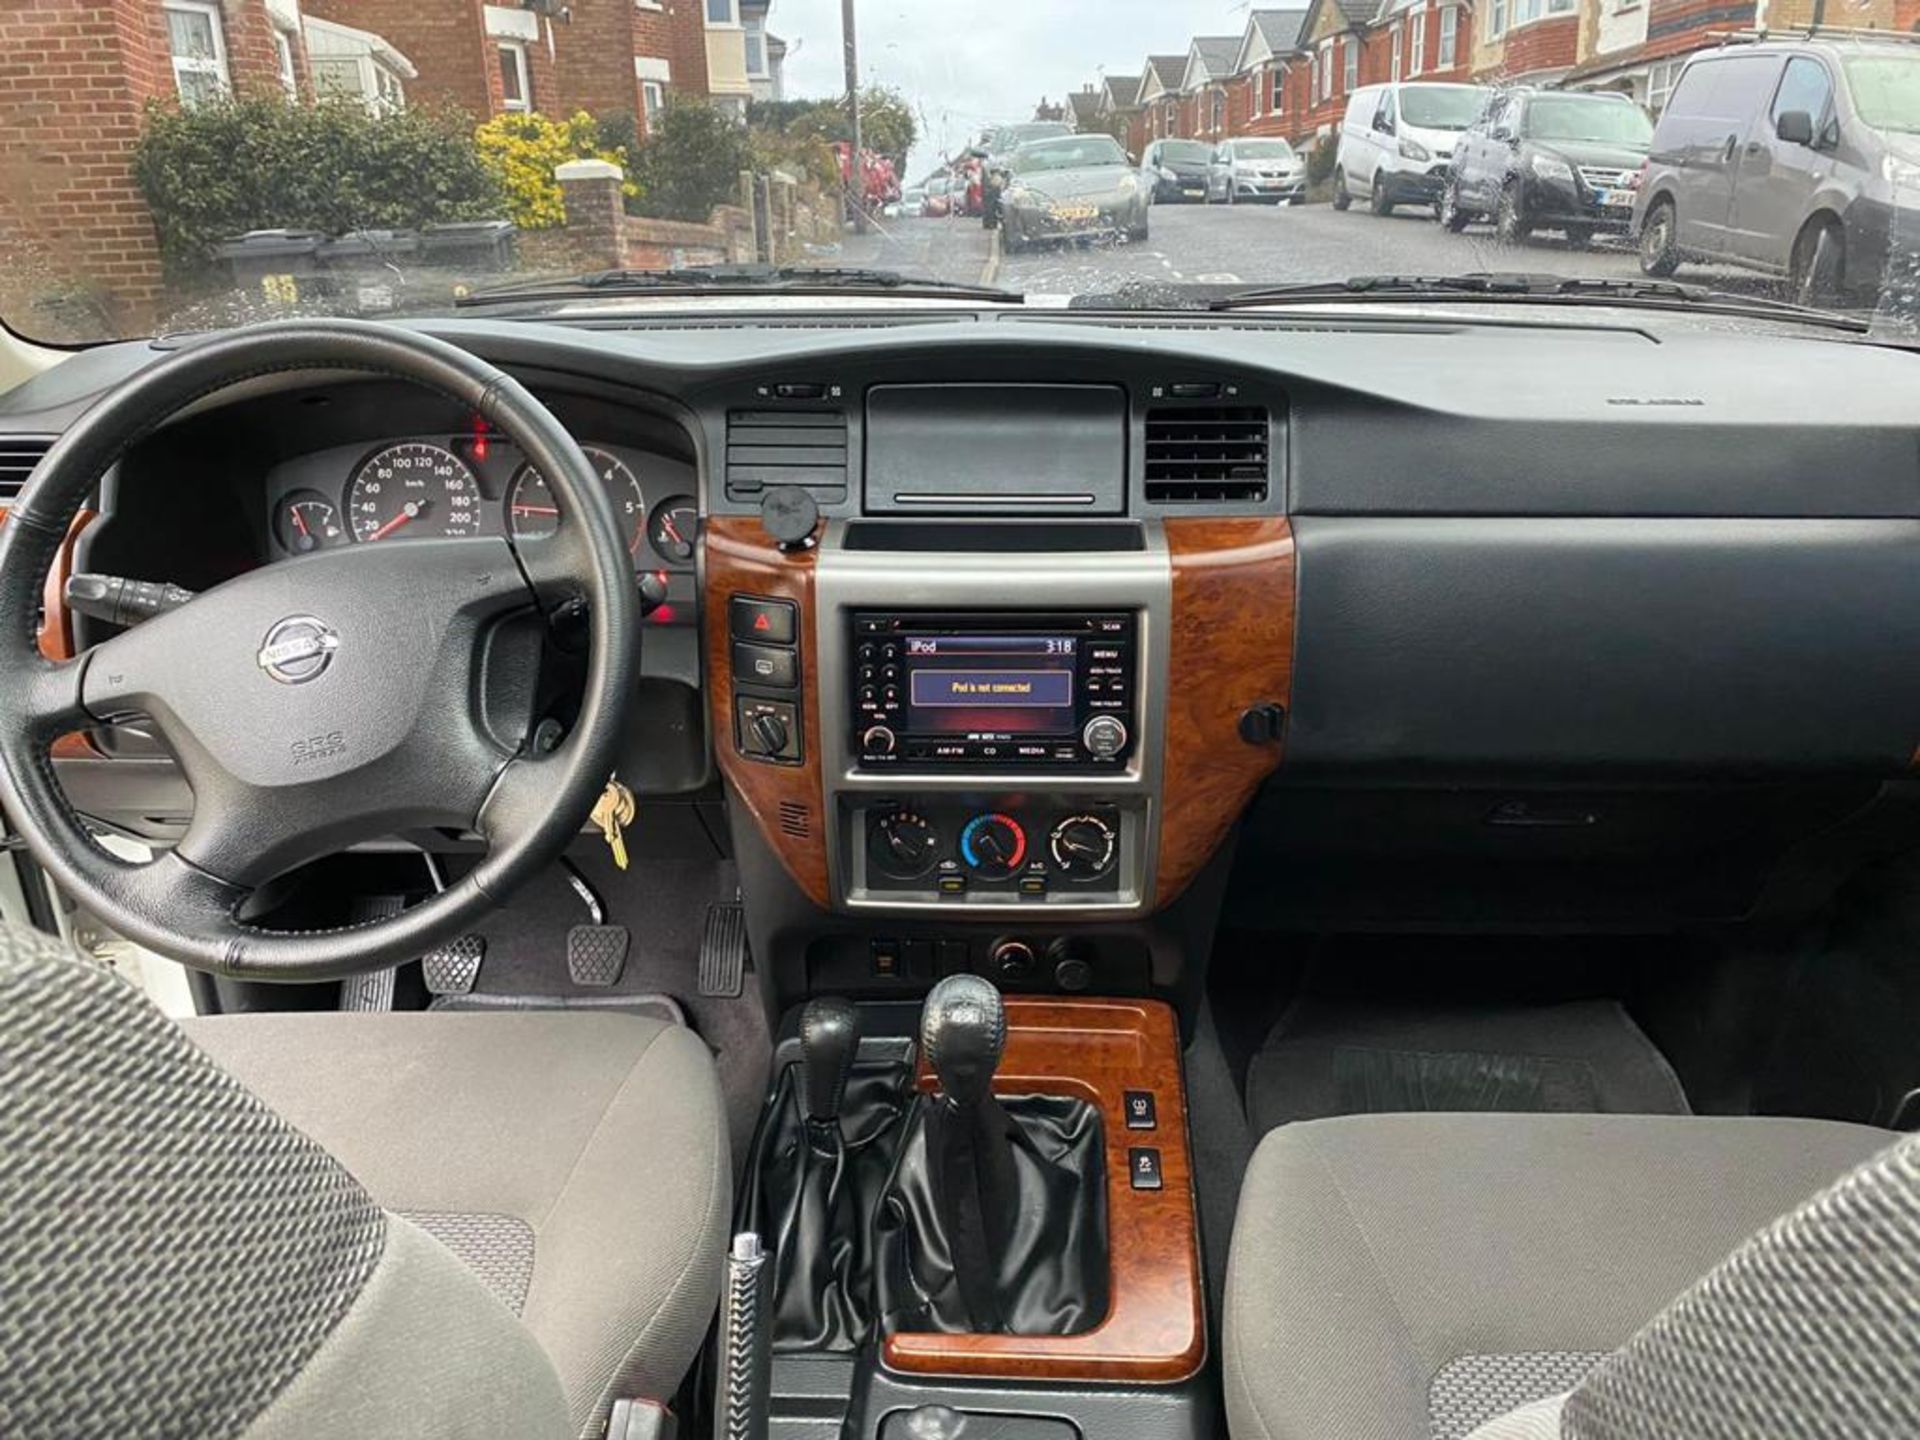 NISSAN PATROL VTC 4800 4.8 LITRE V6 2018 2DR LHD, LEFT IN MAY 2019, 28,000 KM, SHIPPED FROM QATAR - Image 3 of 15